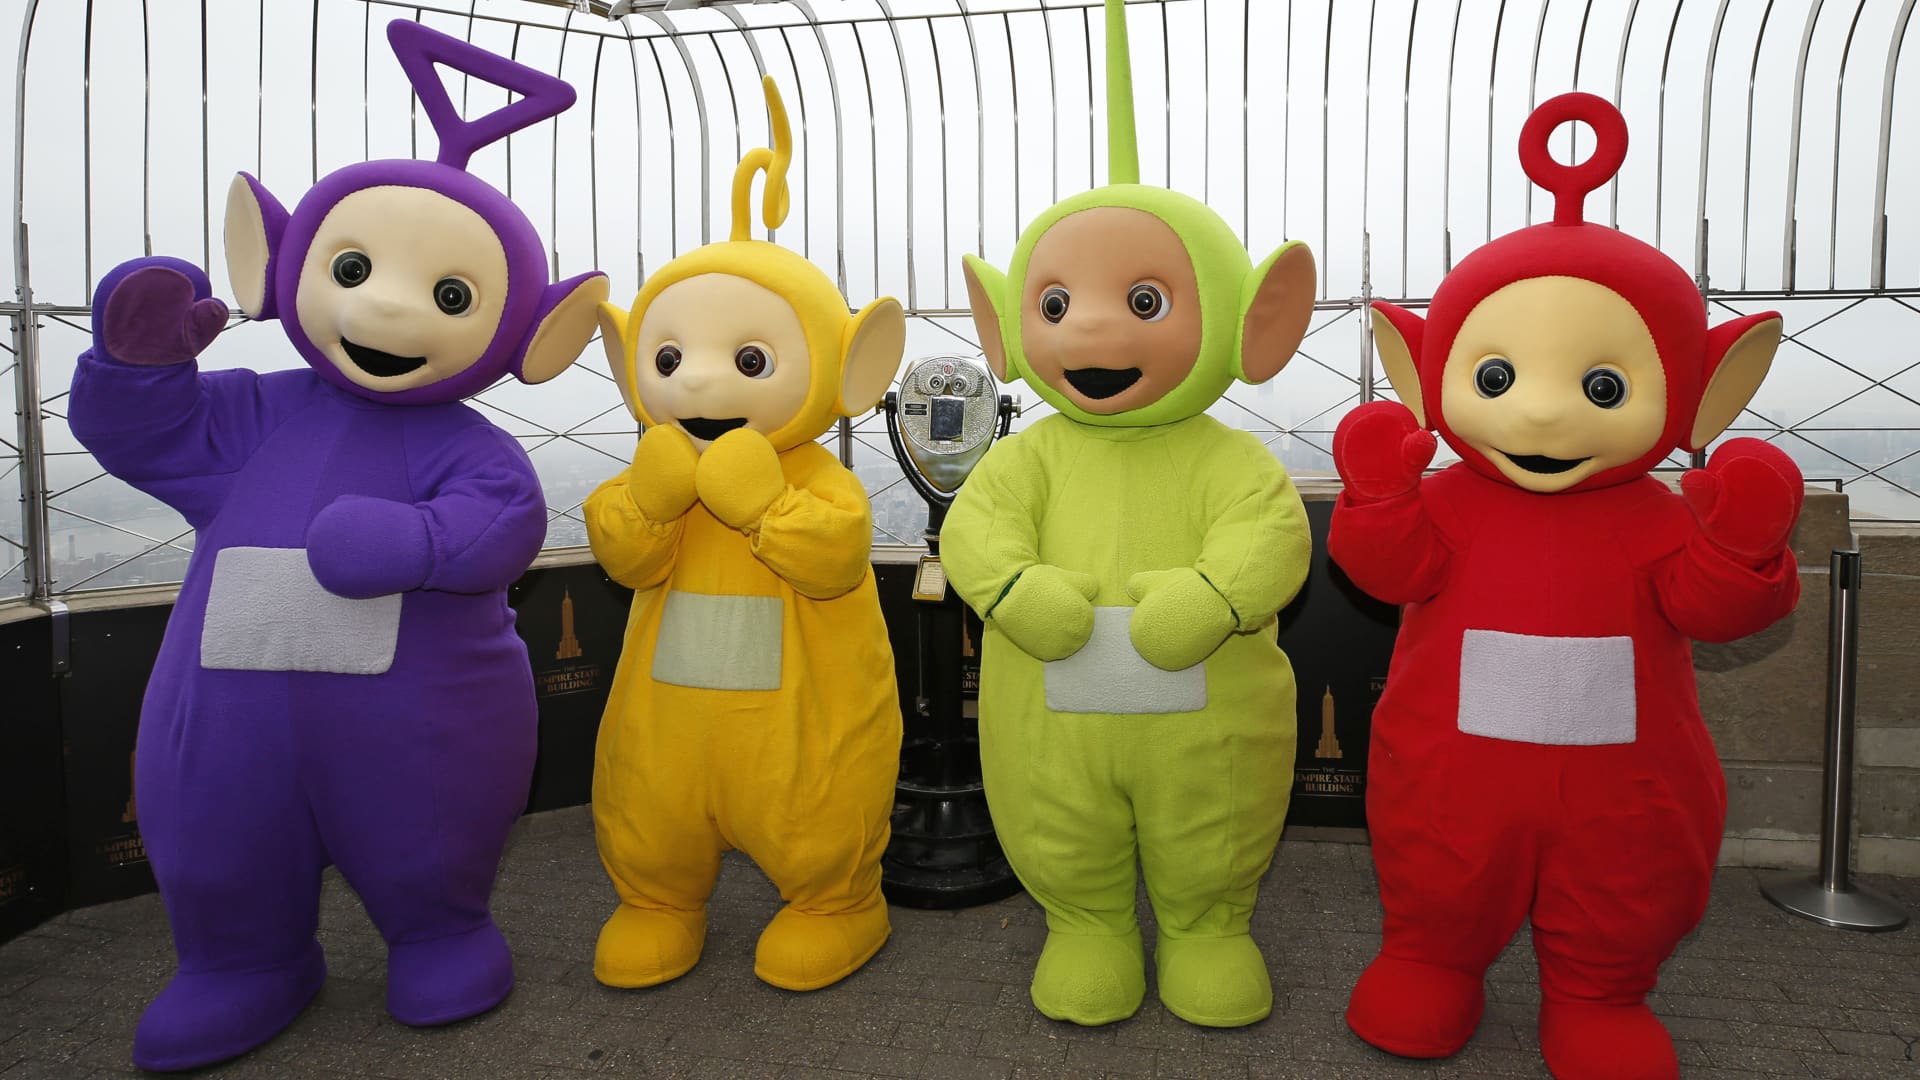 Tinky-Winky, Laa-Laa, Dipsy and Po pose for a photo as the Teletubbies celebrate their 25th anniversary with the Lighting of the Iconic Empire State Building on April 26, 2022 in New York City.